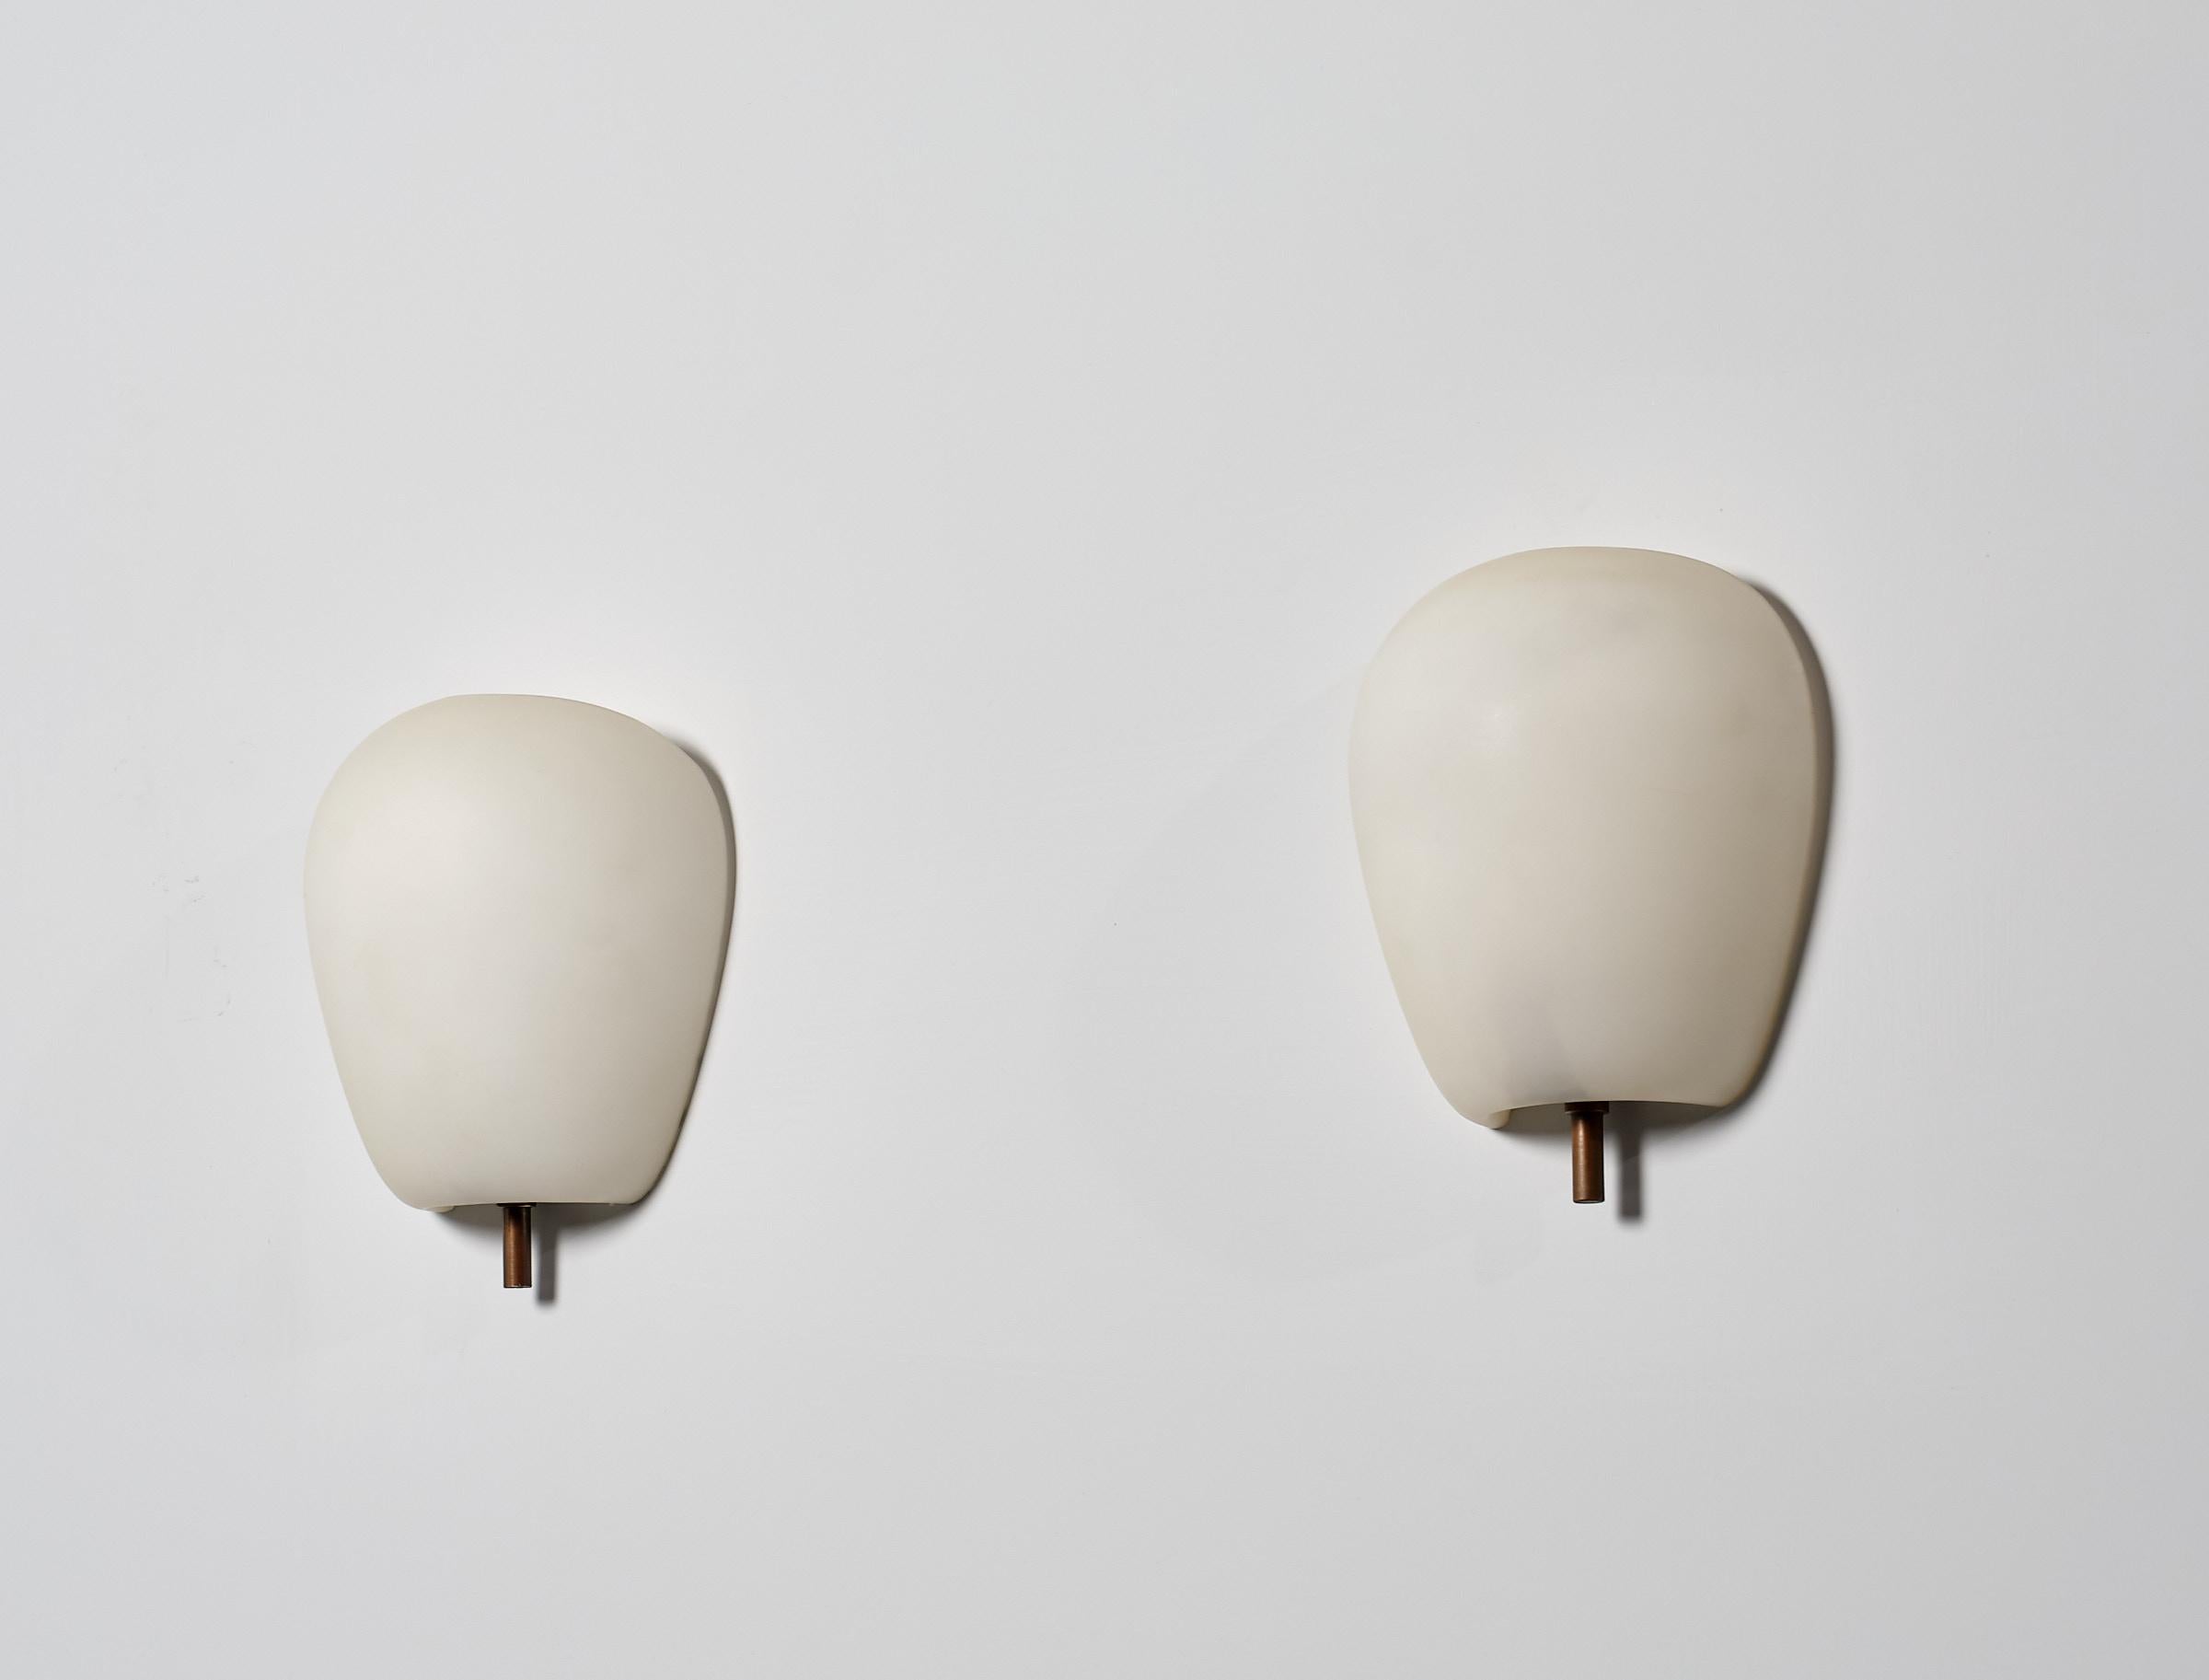 Brass Pair of Italian Design Wall Sconces from the 1950s - Fontana Arte Attribution